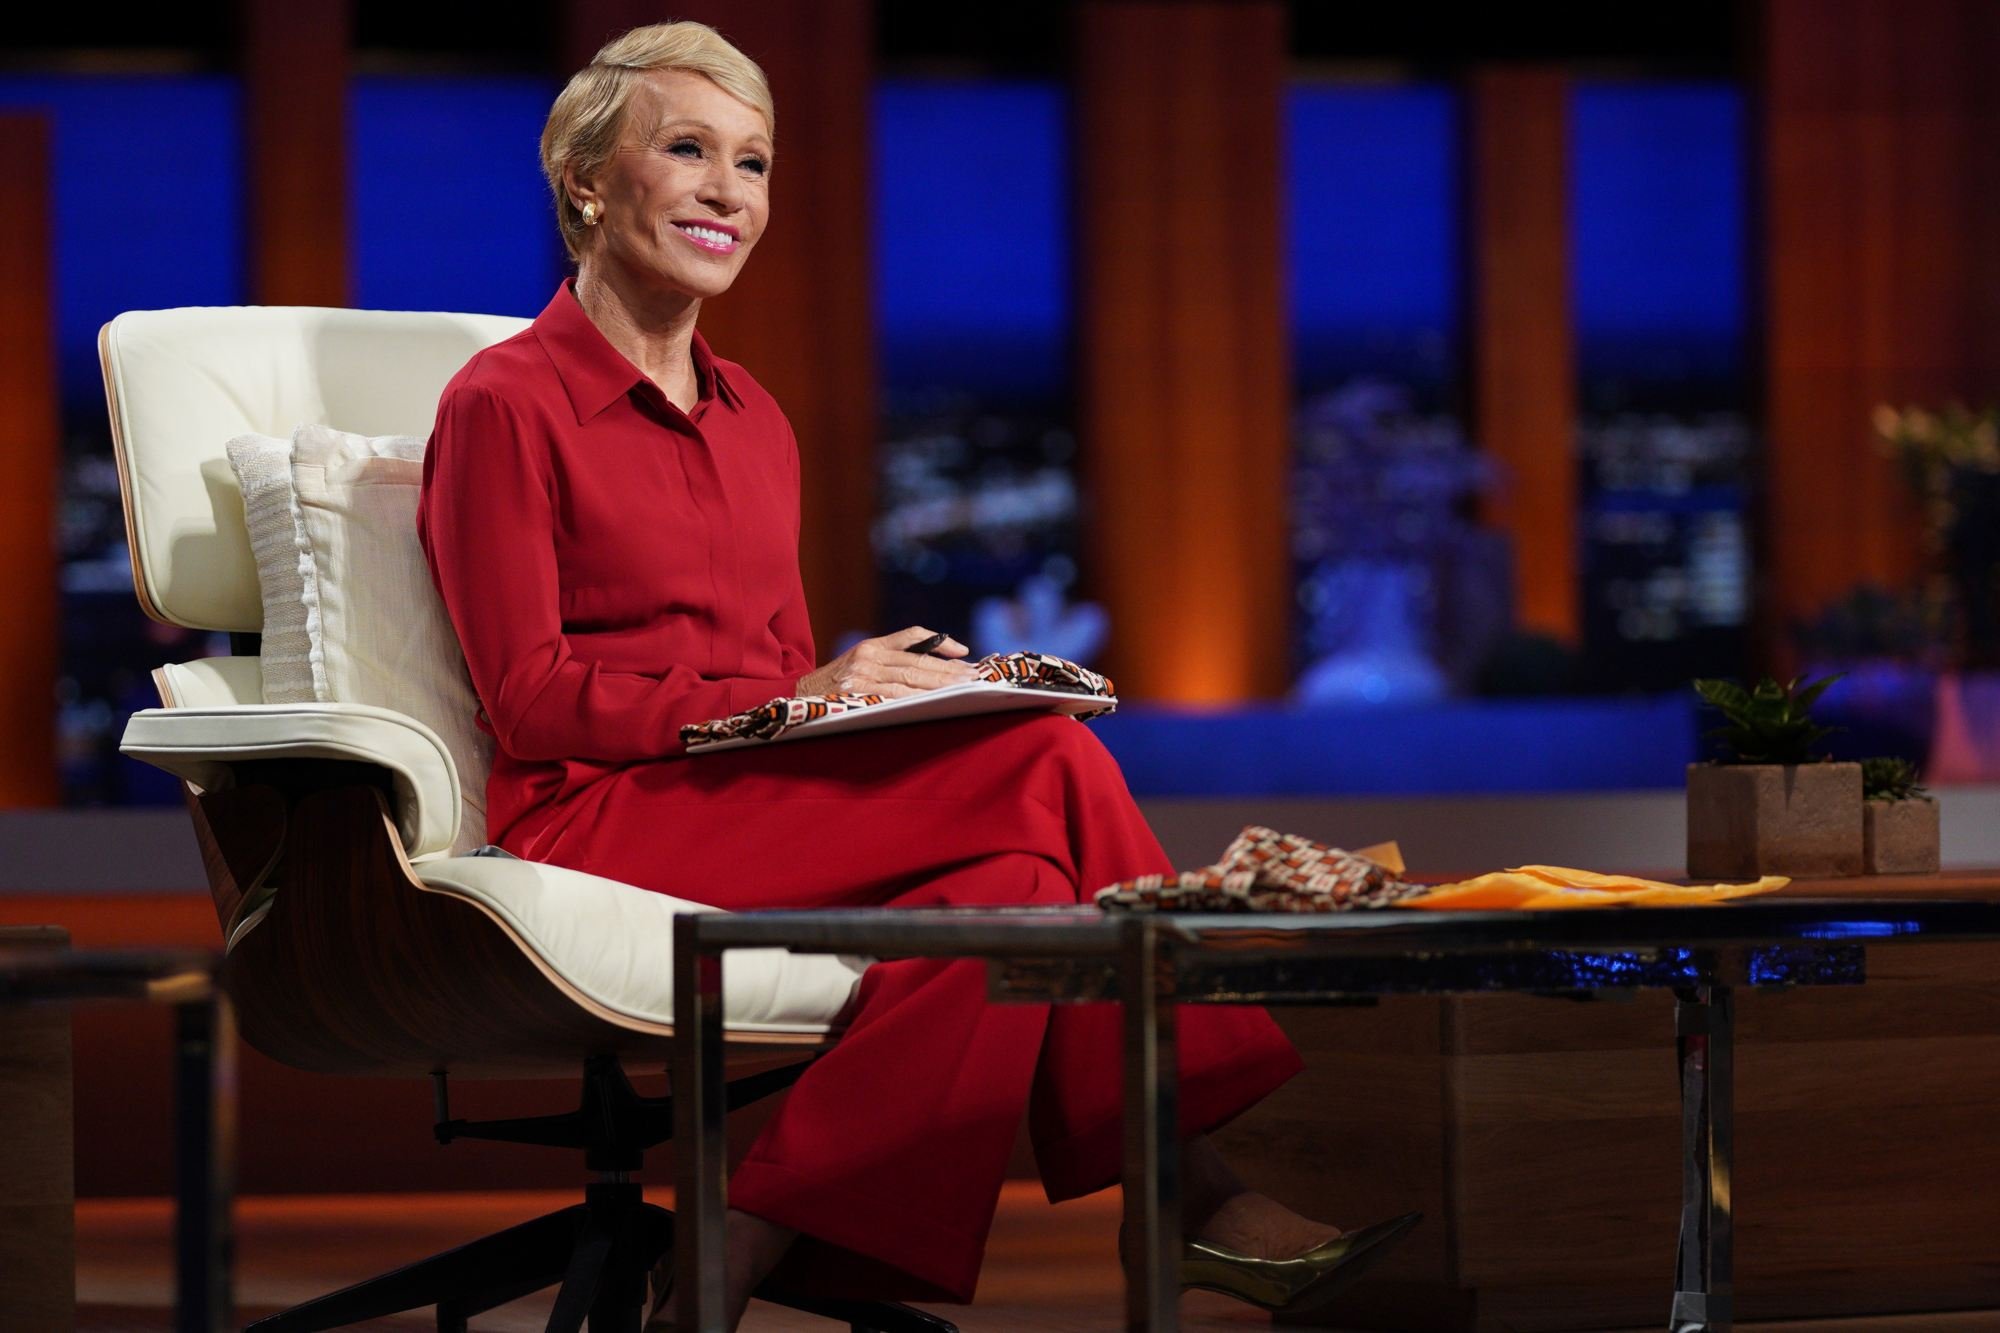 'Shark Tank' Barbara Corcoran smiling wearing a red suit, sitting in a white chair.